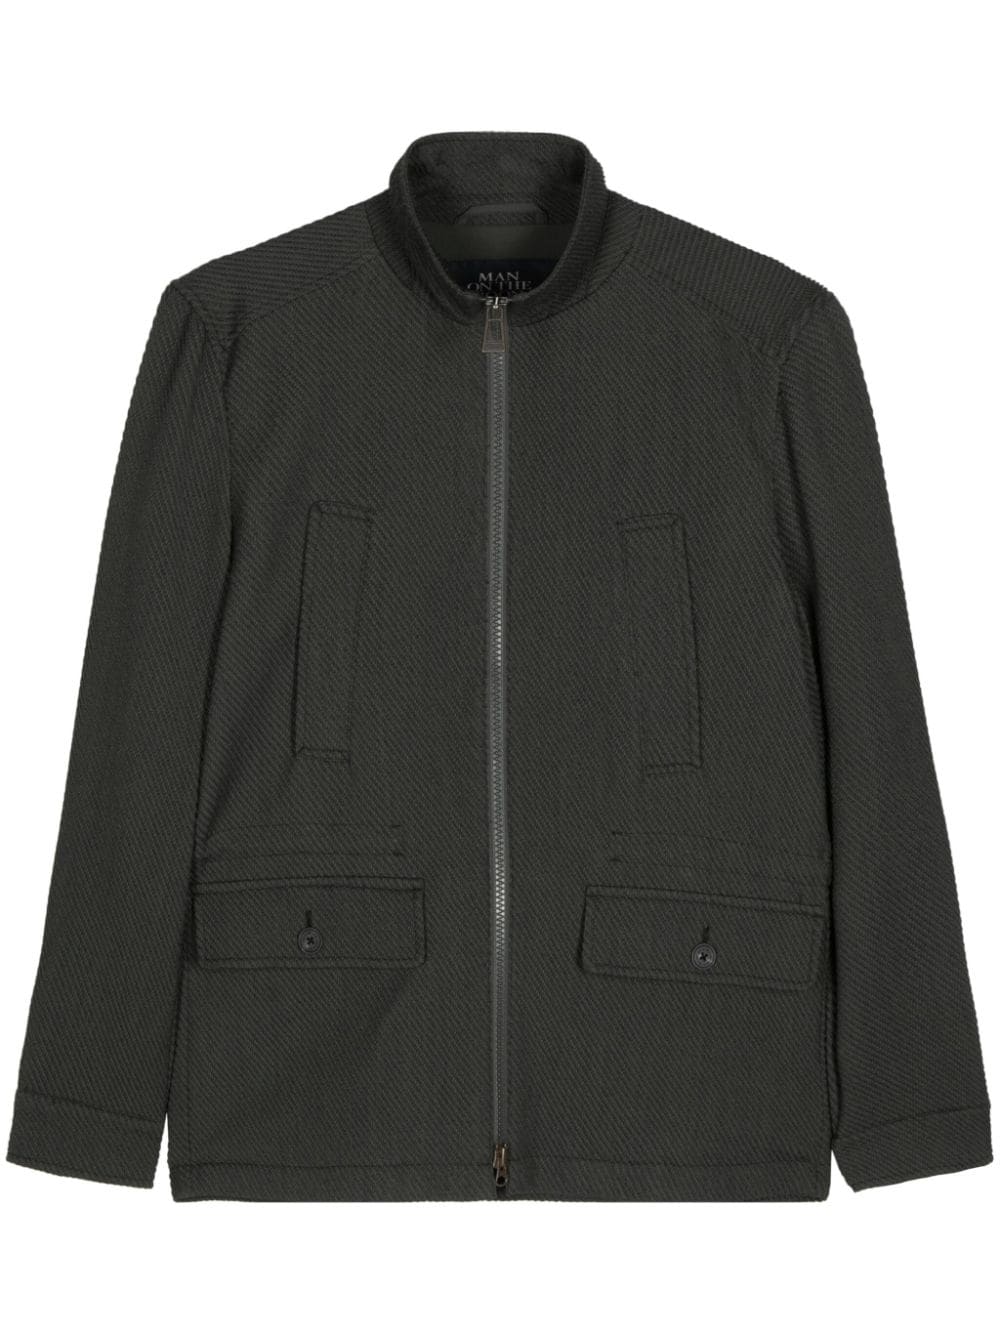 Man On The Boon. Textured Wool Blend Jacket In Green